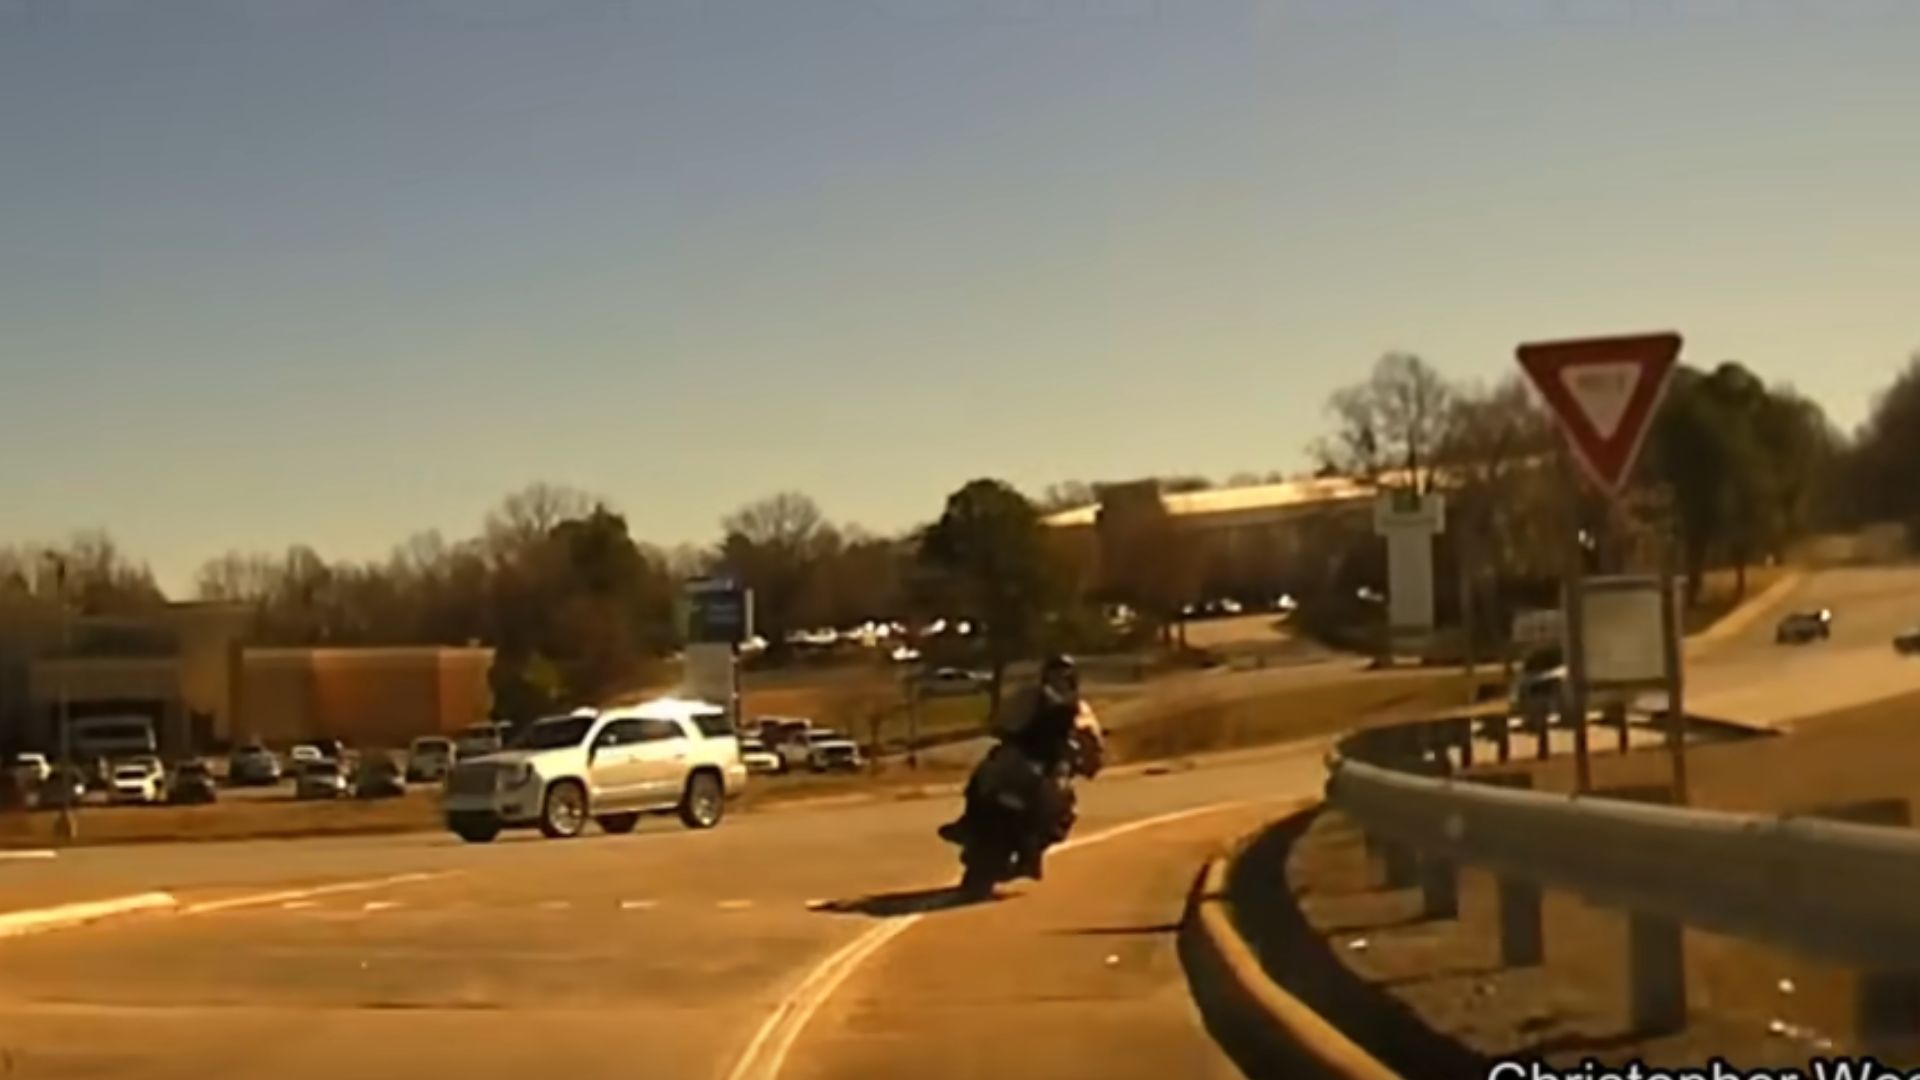 Pursuing Trooper Only Had To Follow This Fleeing Suzuki Motorcycle